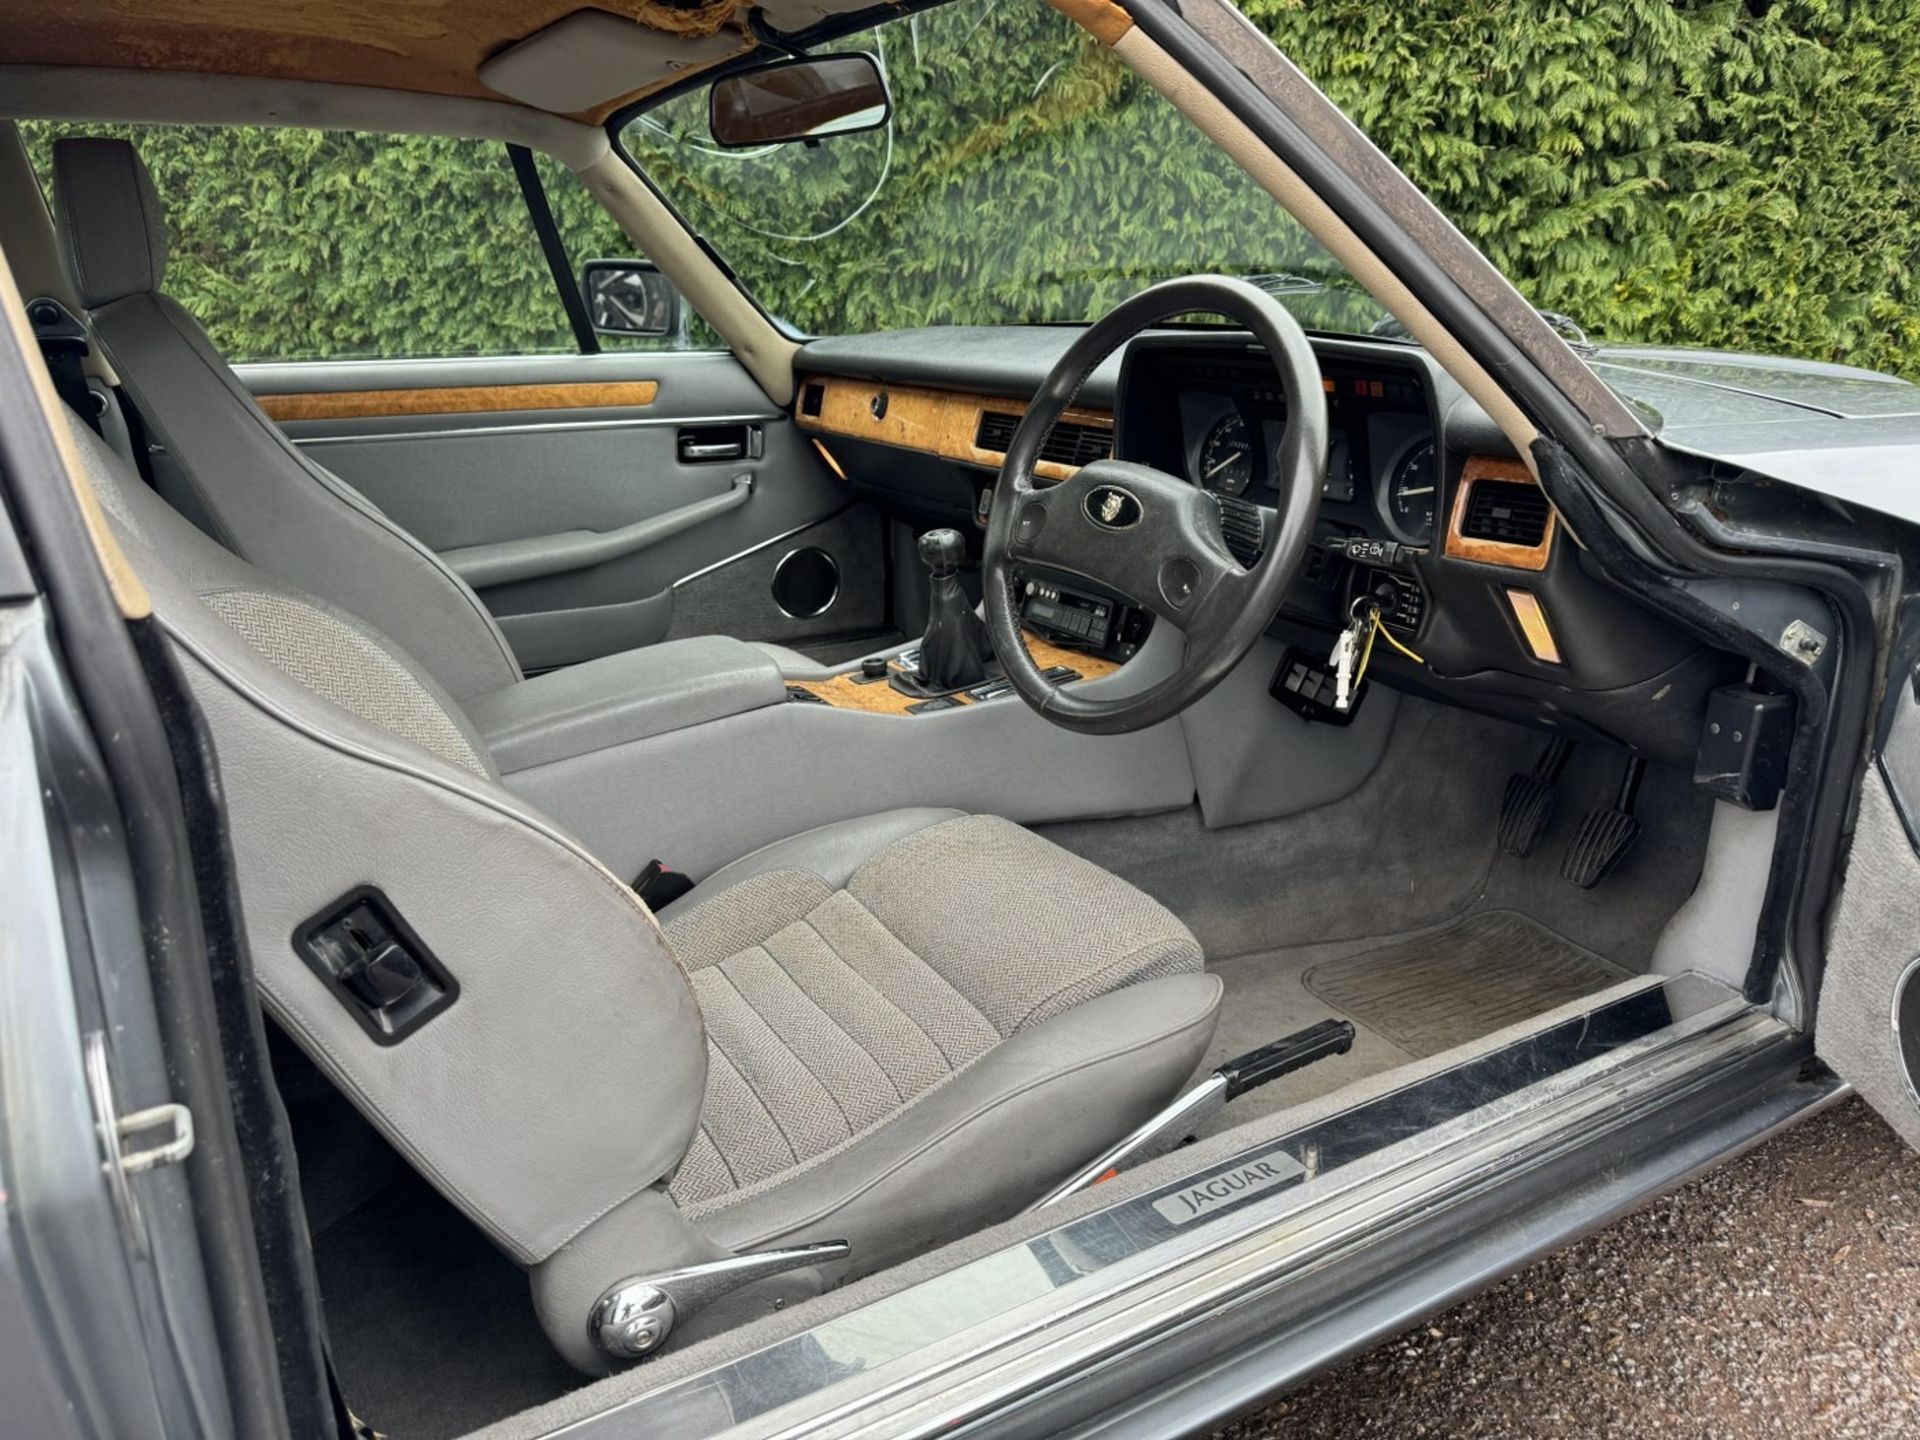 1988 Jaguar XJ-S 3.6 Coupe Registration number E259 OAD Metallic light blue with a half leather - Image 14 of 24